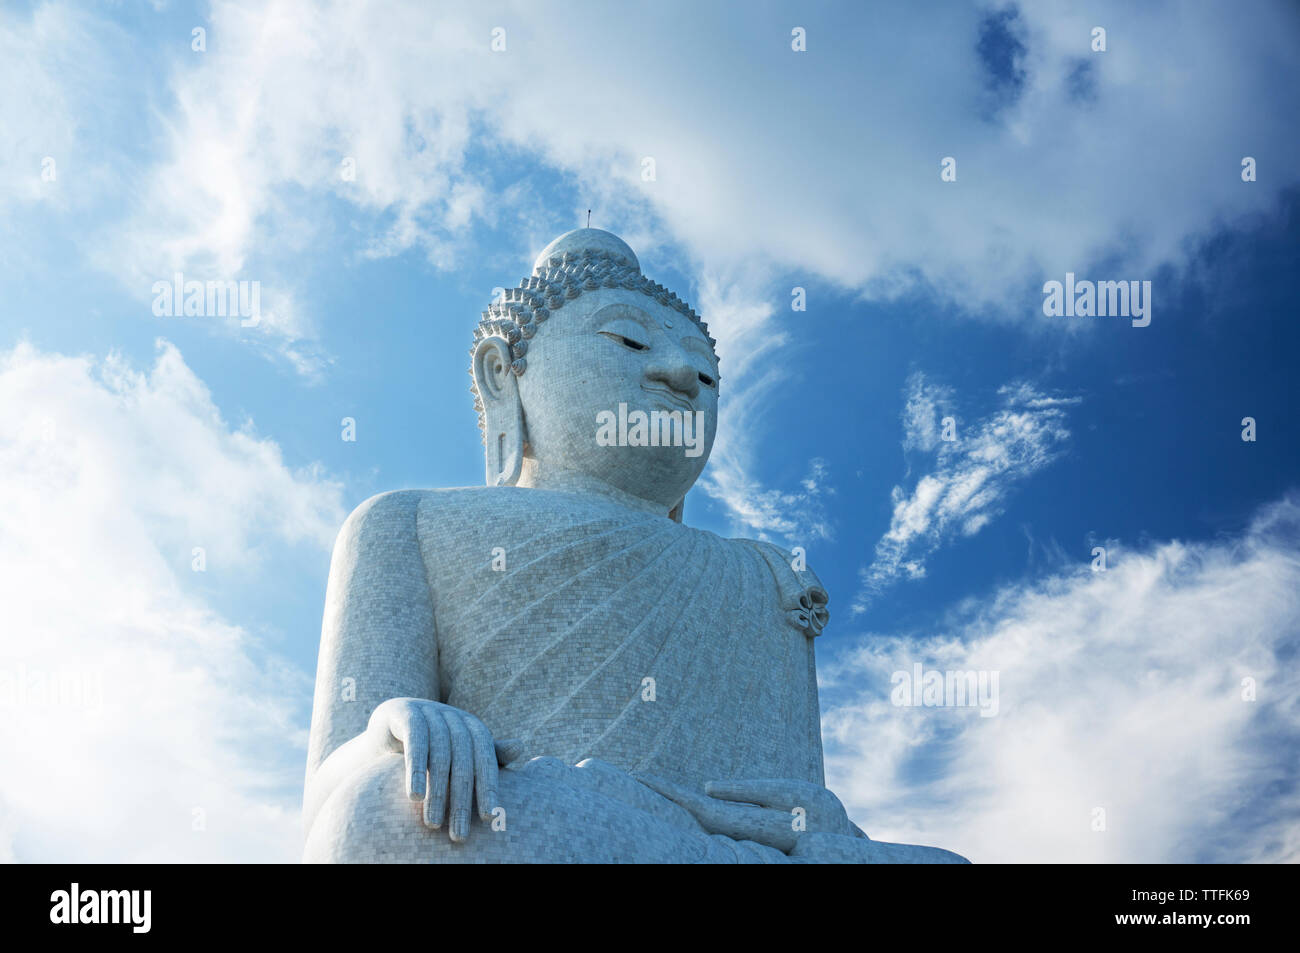 Low angle view of Buddha statue against cloudy sky during sunny day Stock Photo